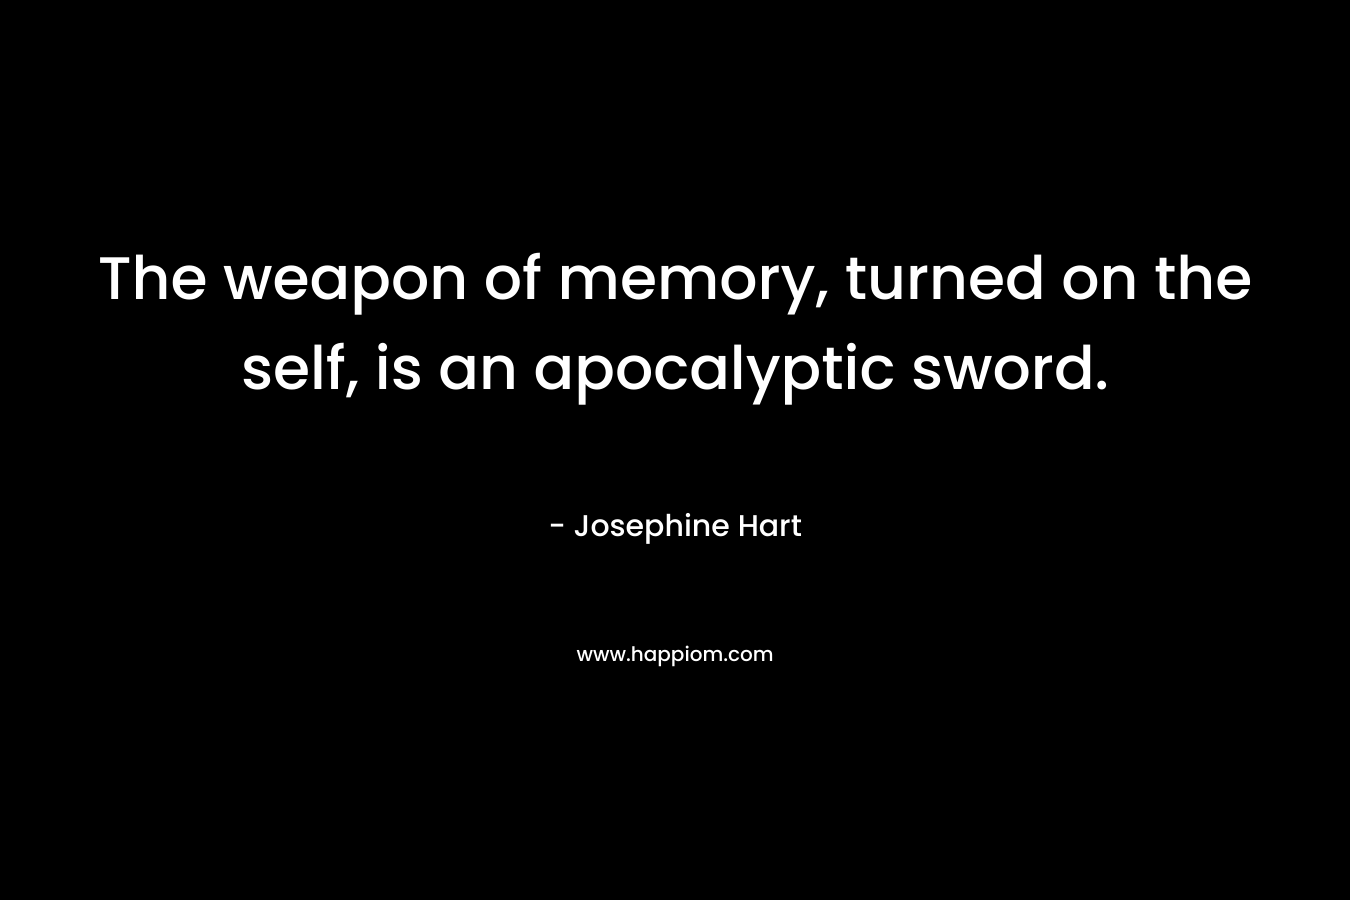 The weapon of memory, turned on the self, is an apocalyptic sword.